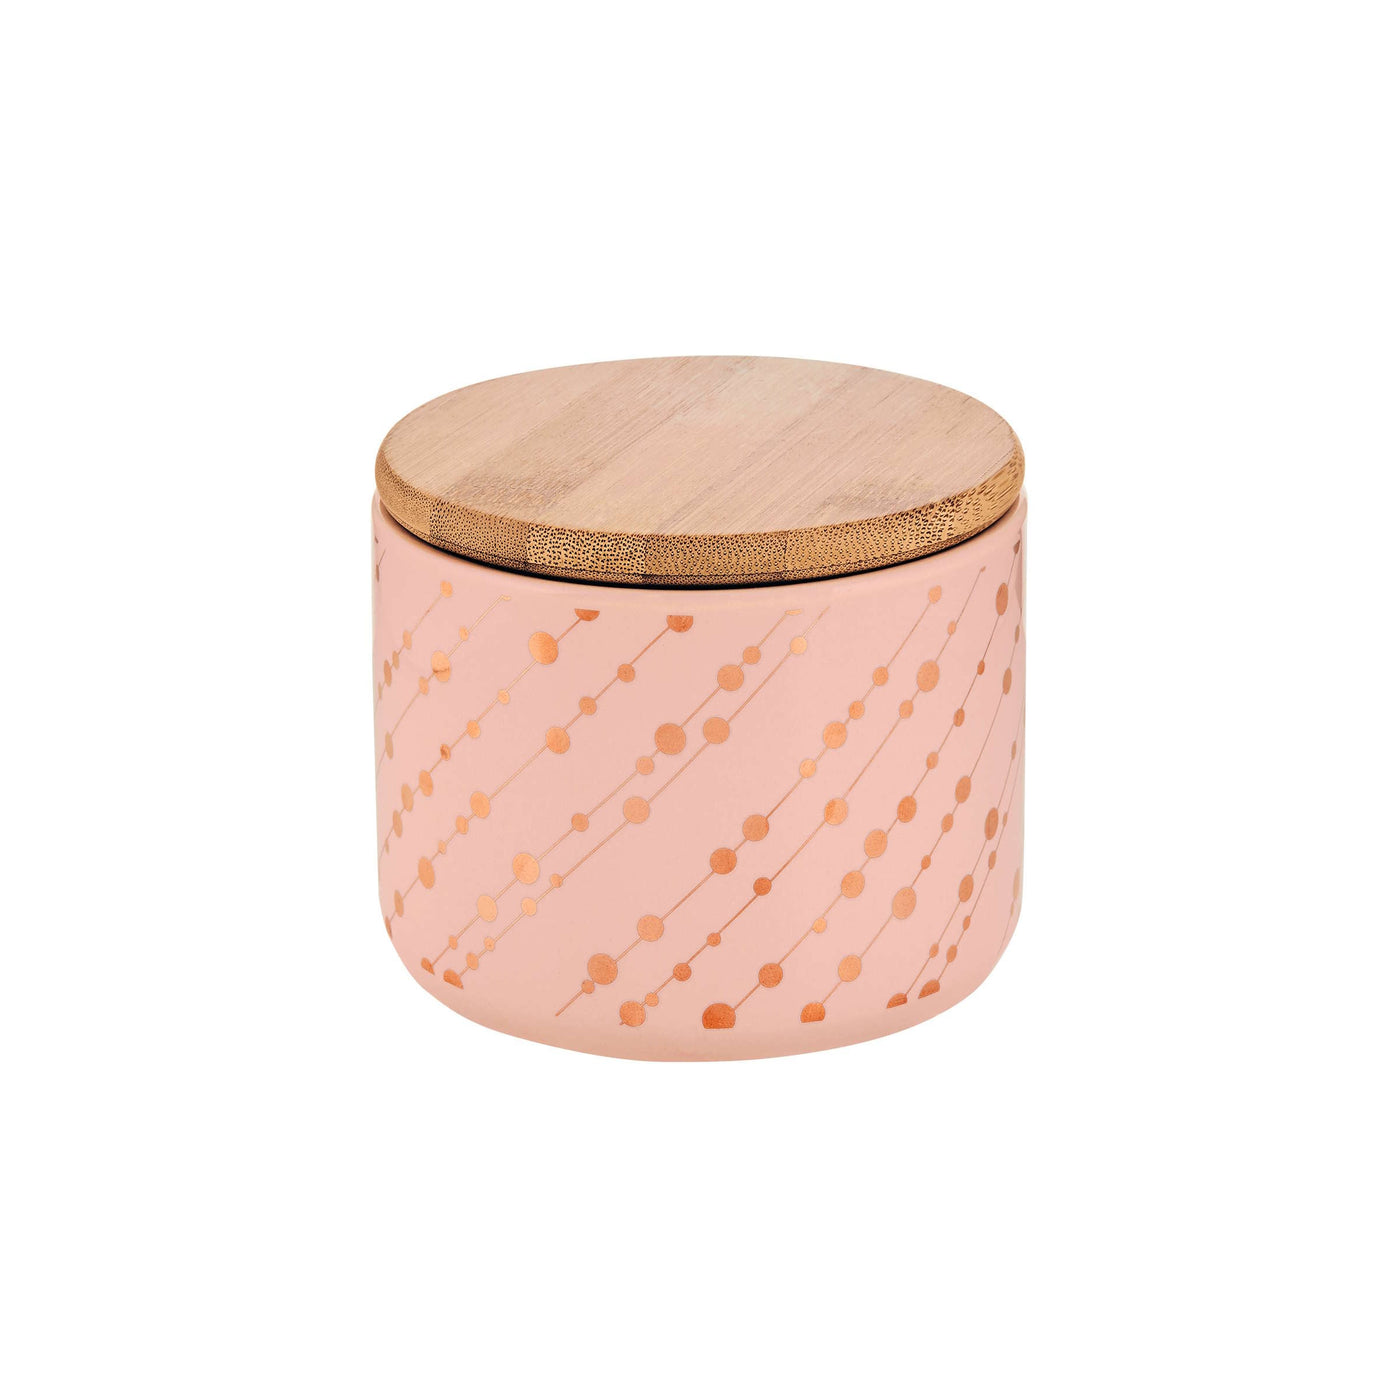 Butlers Queen It Storage Jar with a Decorative Line Pattern Reigns 400ml